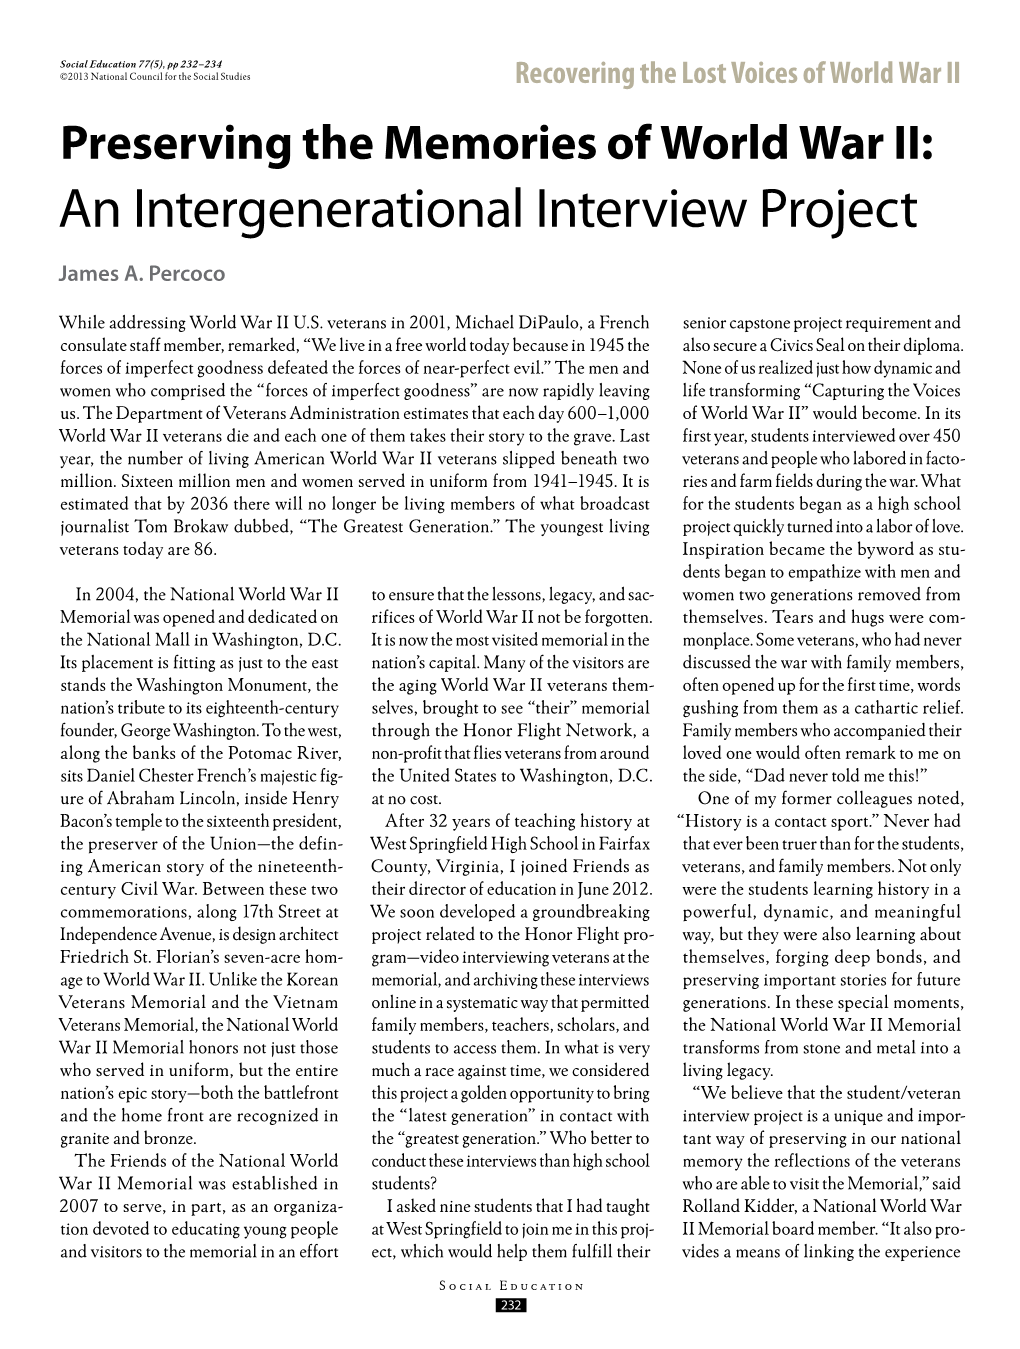 An Intergenerational Interview Project